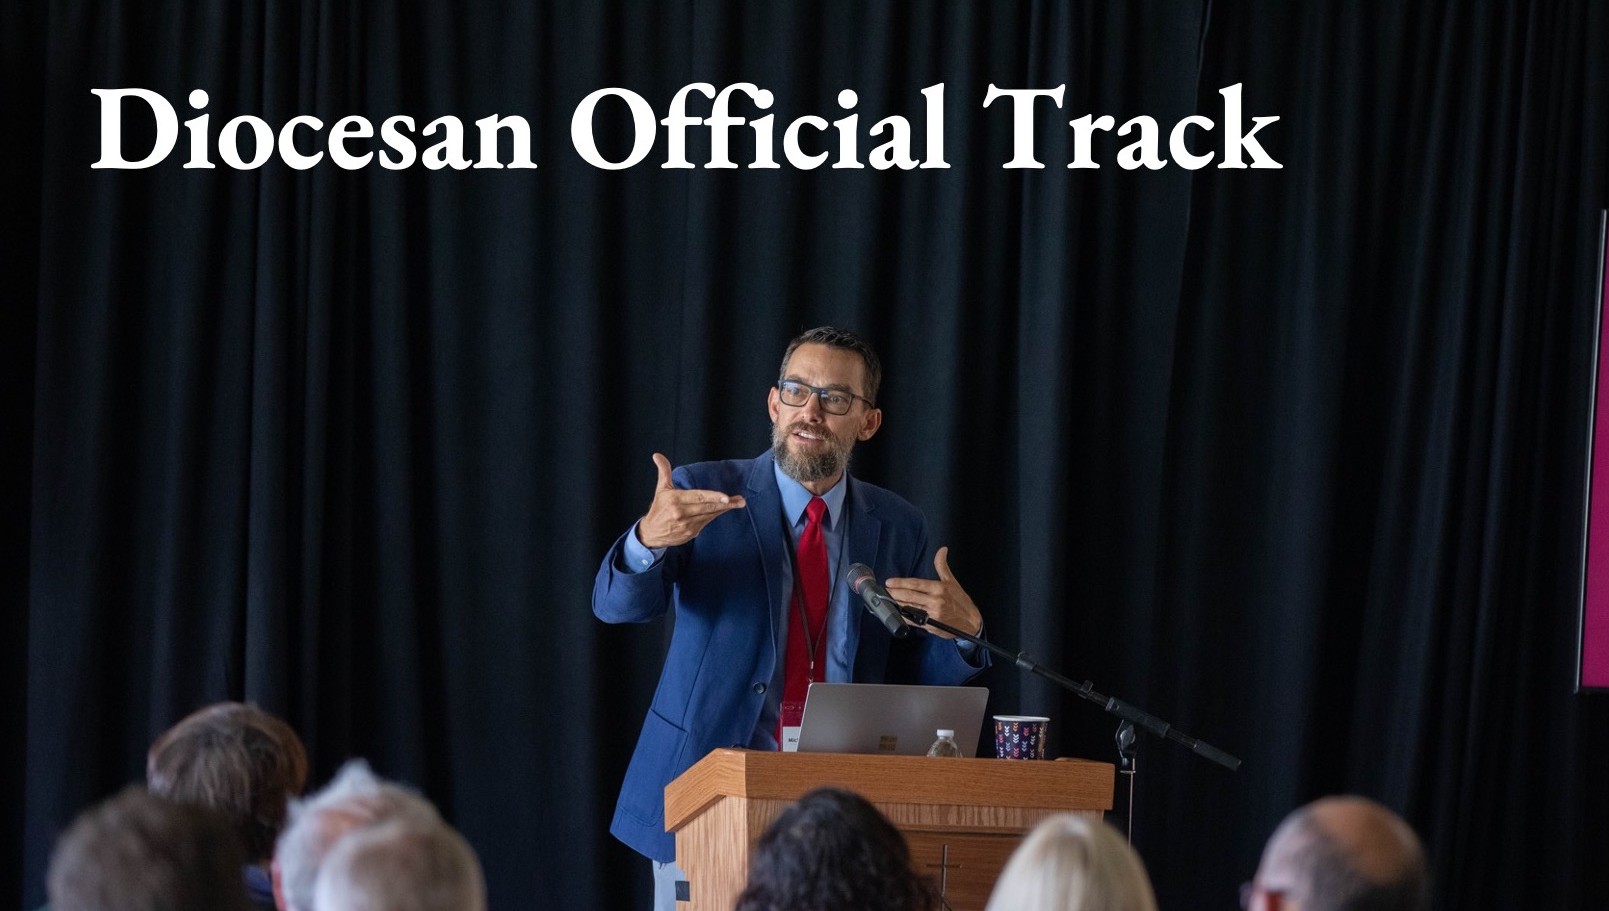 Diocesan Official Track